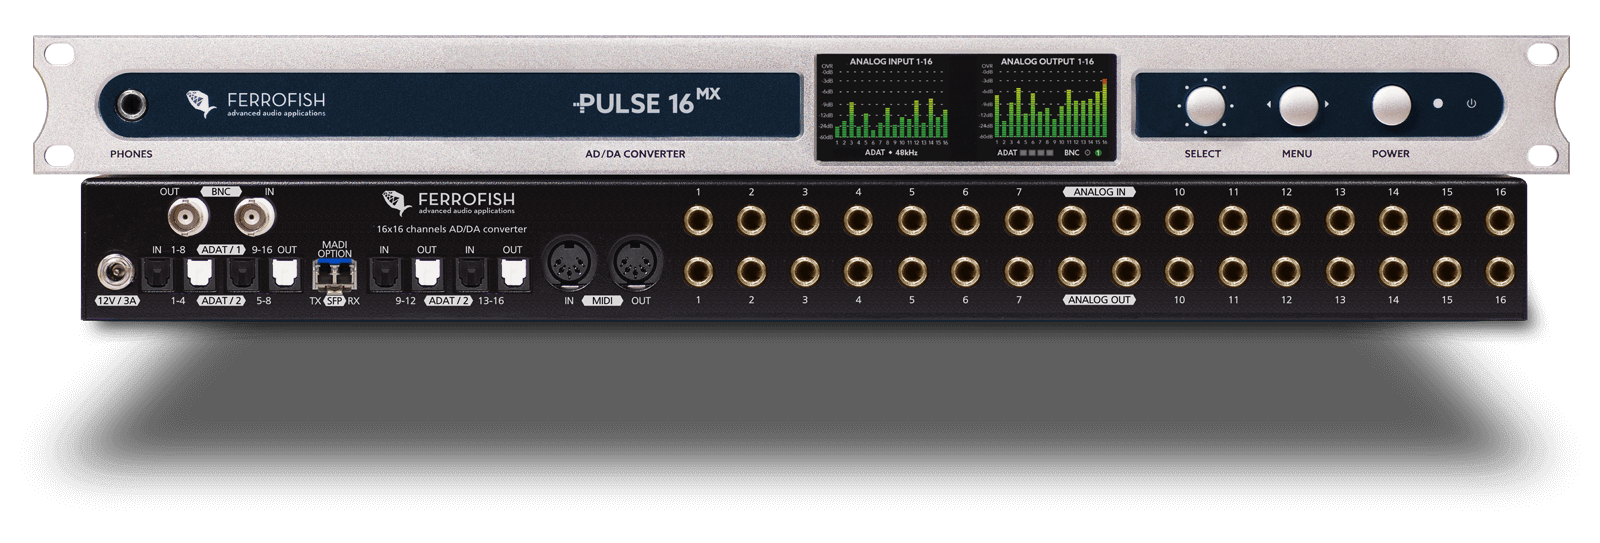 Ferrofish Pulse 16 MX - 16 in / 16 out AD/DA converter with ADAT and MADI